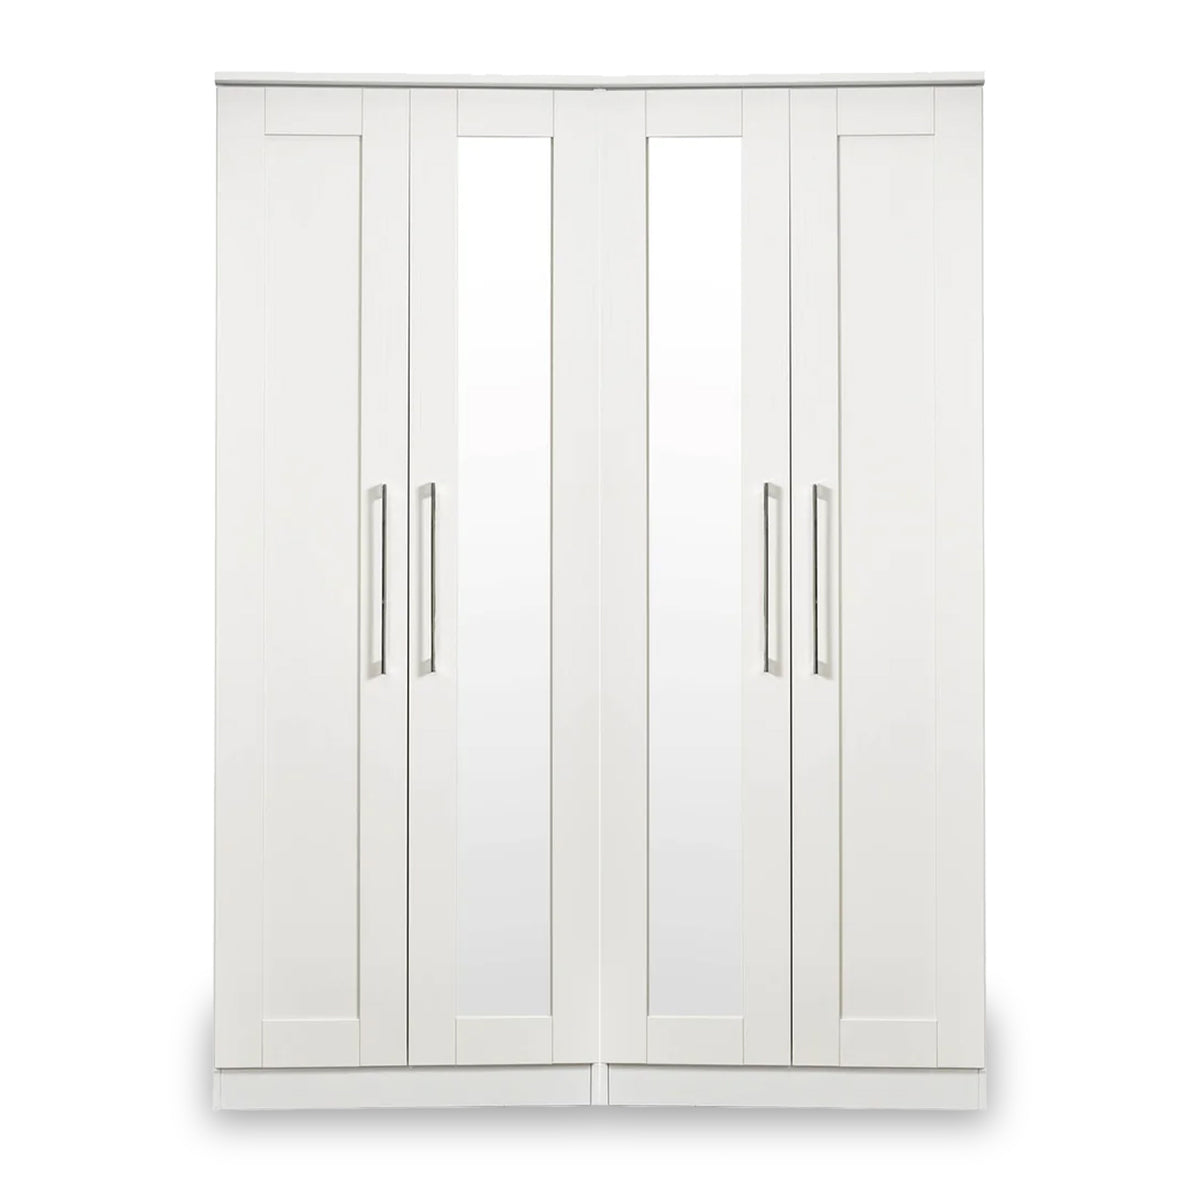 Bellamy White Tall 4 Door 2 Central Mirrored Wardrobe from Roseland Furniture